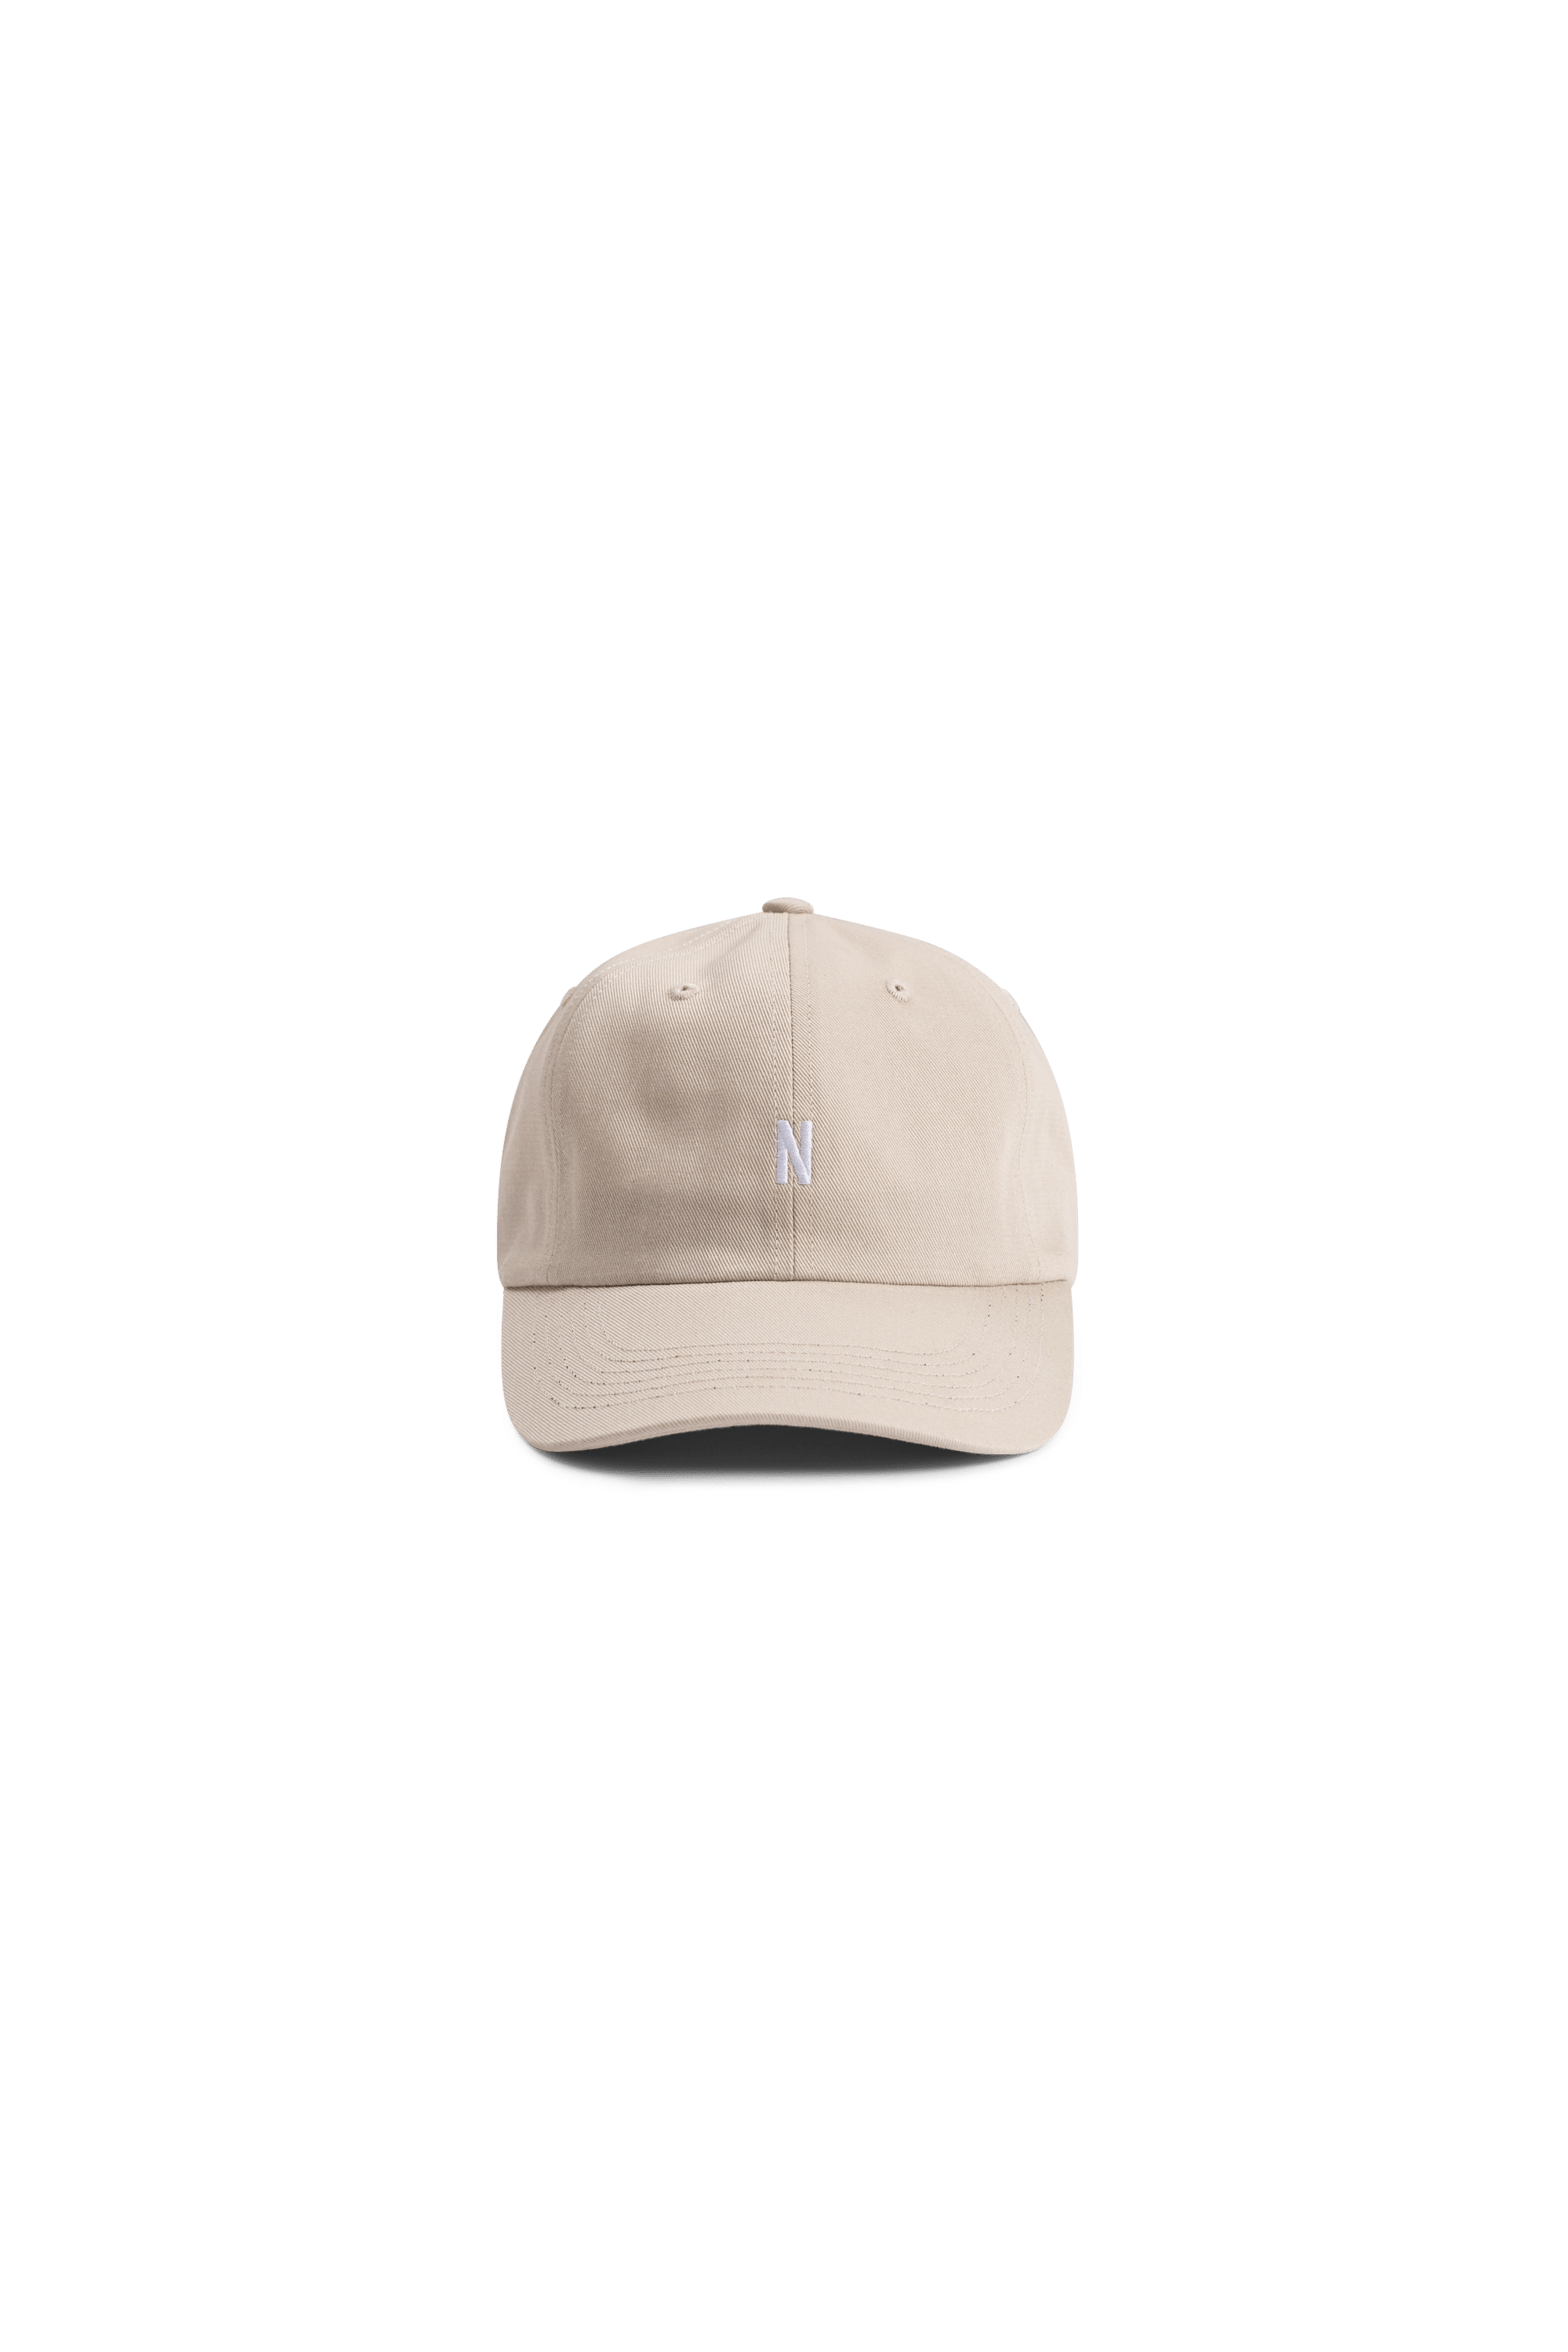 NORSE PROJECTS Twill Sports Cap - Marble White Front